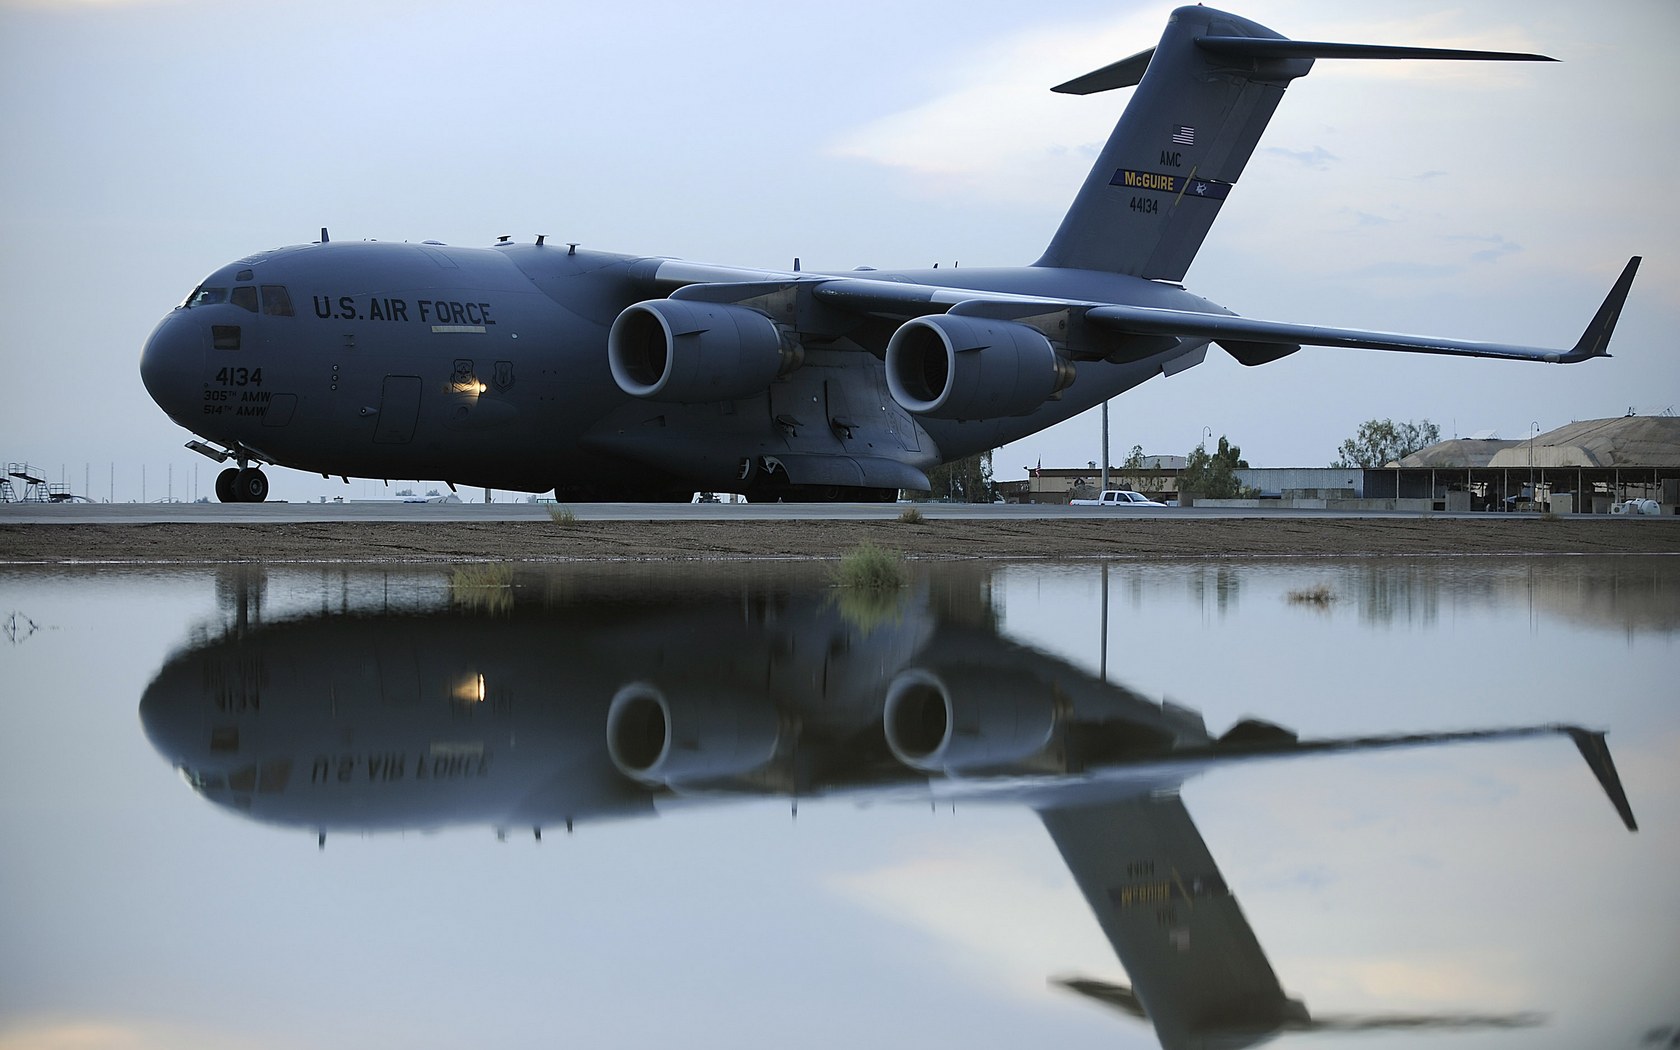 Download full size C-17 Globemaster Military Airplanes wallpaper / 1680x1050